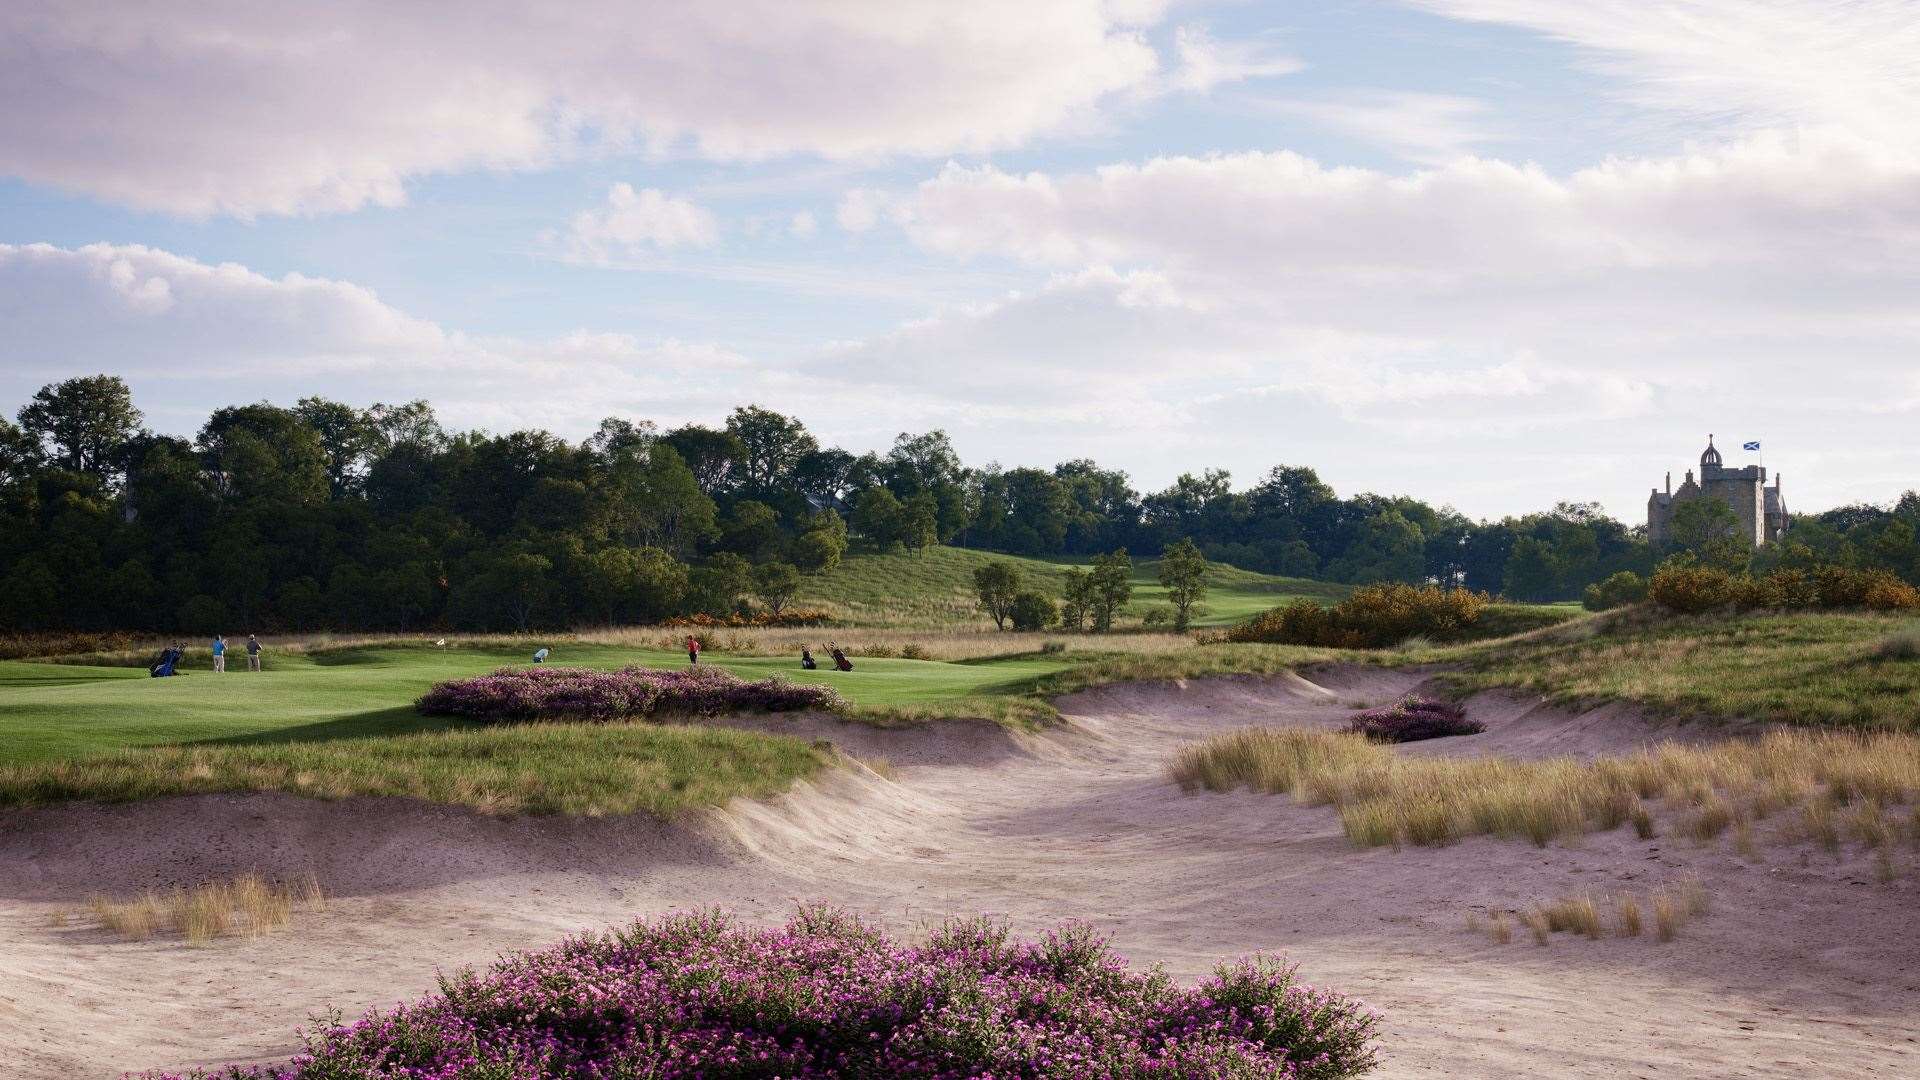 An artist's impression of the 15th hole at Cabot Highlands' new Old Petty course. Rendered by: Harris Kalinka, Picture: Cabot Highlands website